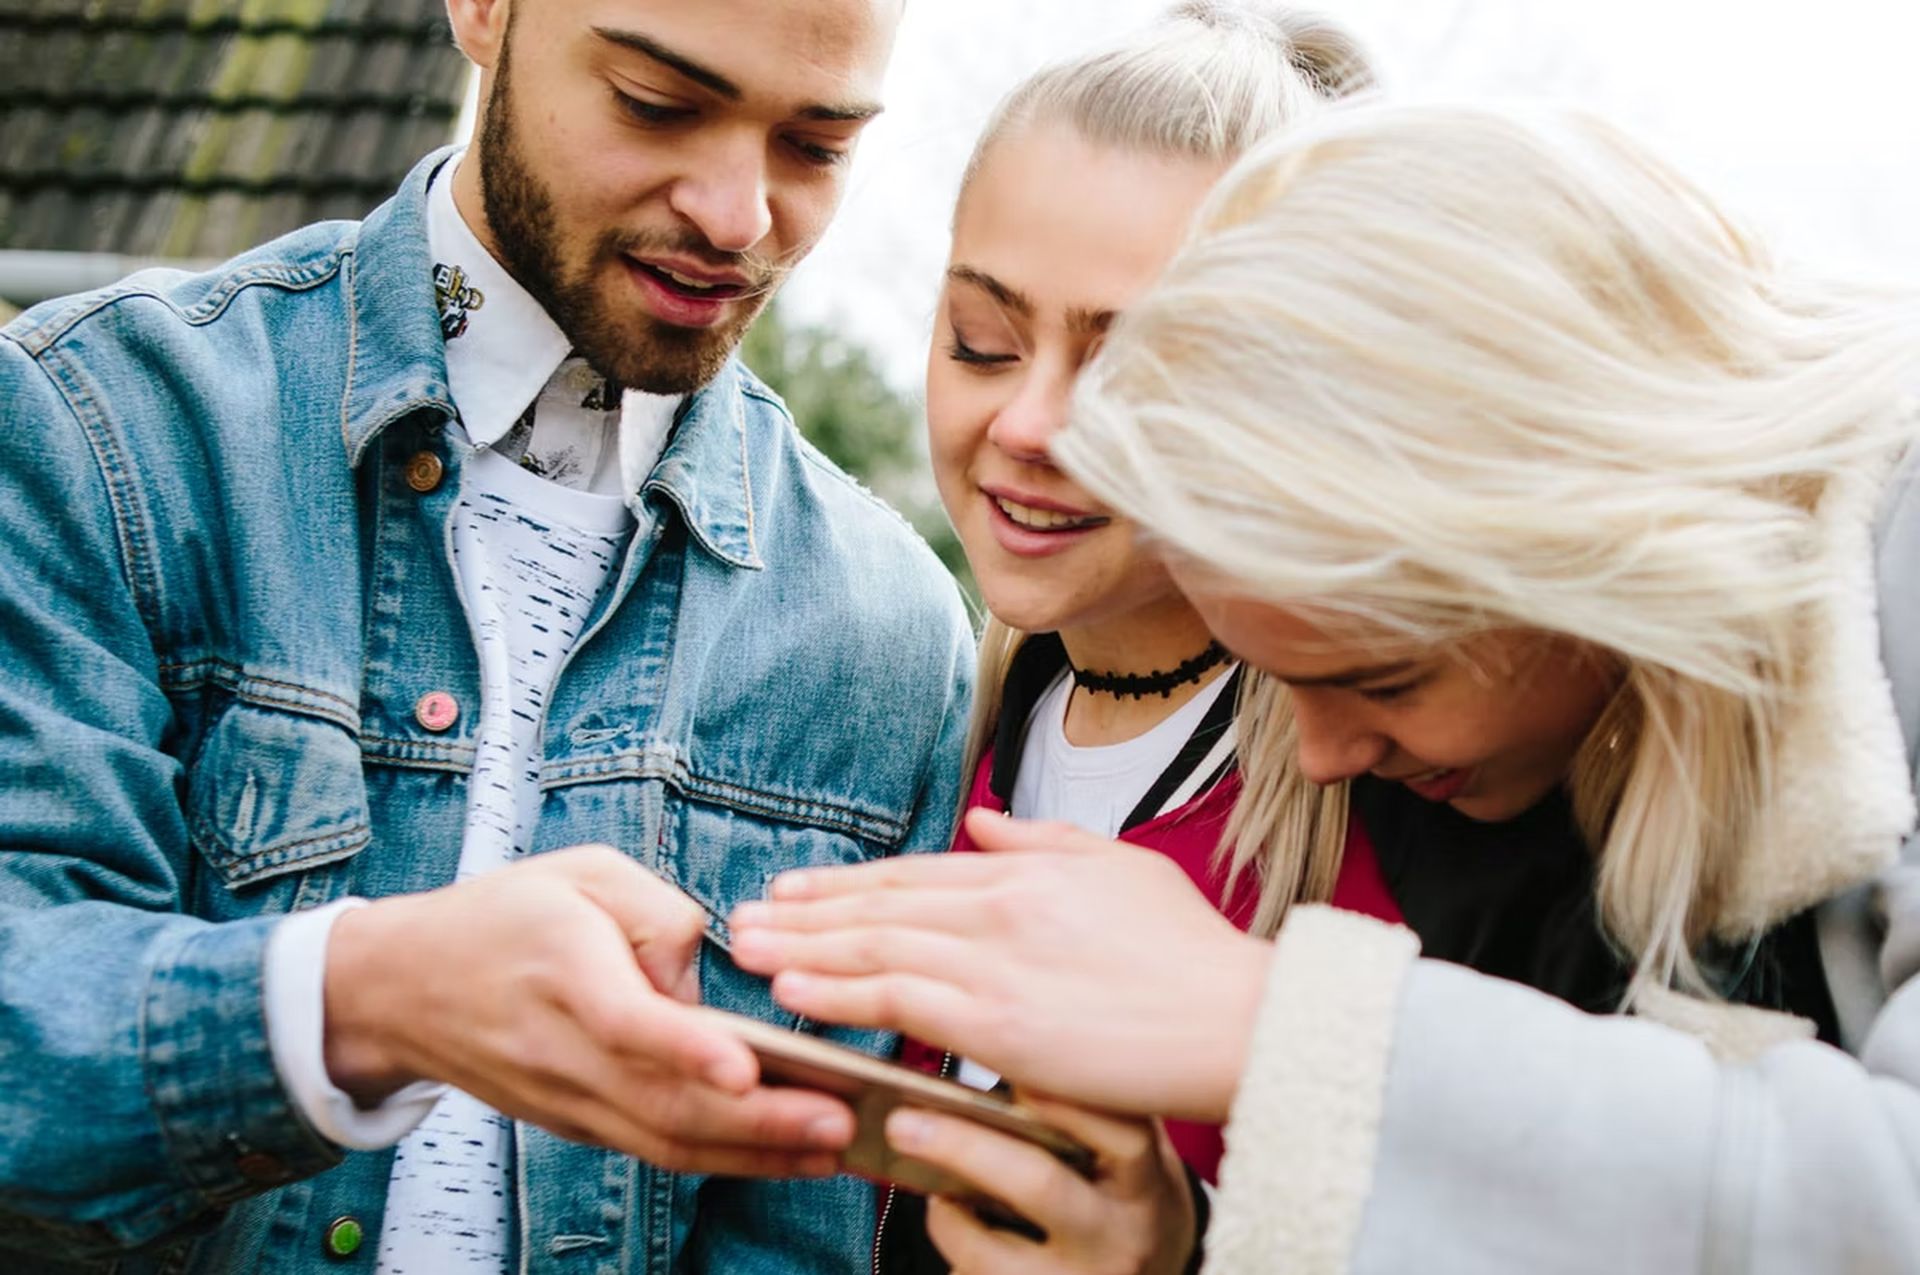 In this article, we are going to be covering Gen Z uses TikTok as a search engine, as the young population prefers social media when searching for things.